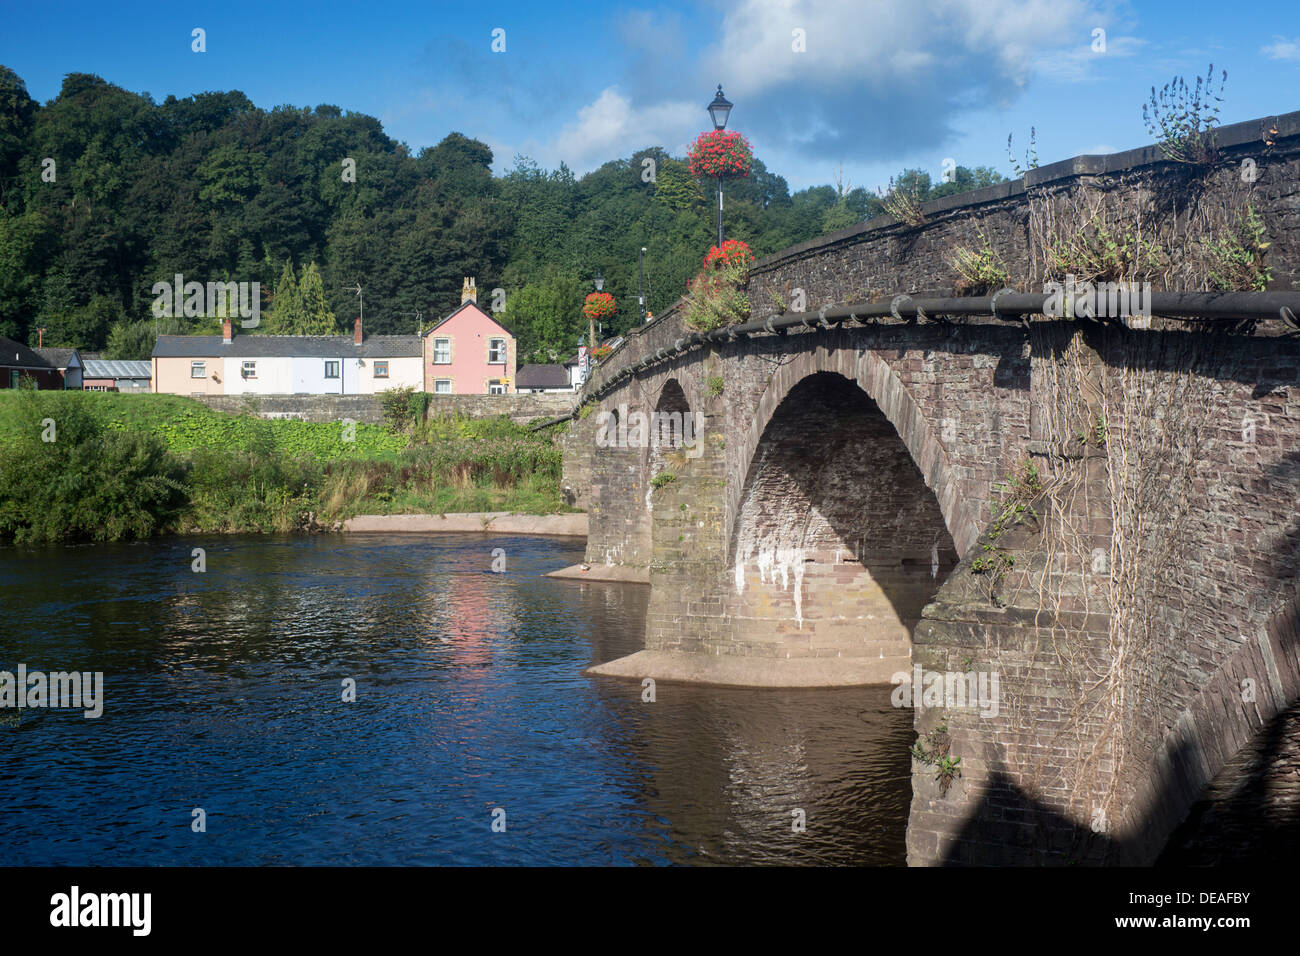 Ad arcate in pietra ponte sopra il fiume Usk Usk Brynbuga Monmouthshire South East Wales UK Foto Stock